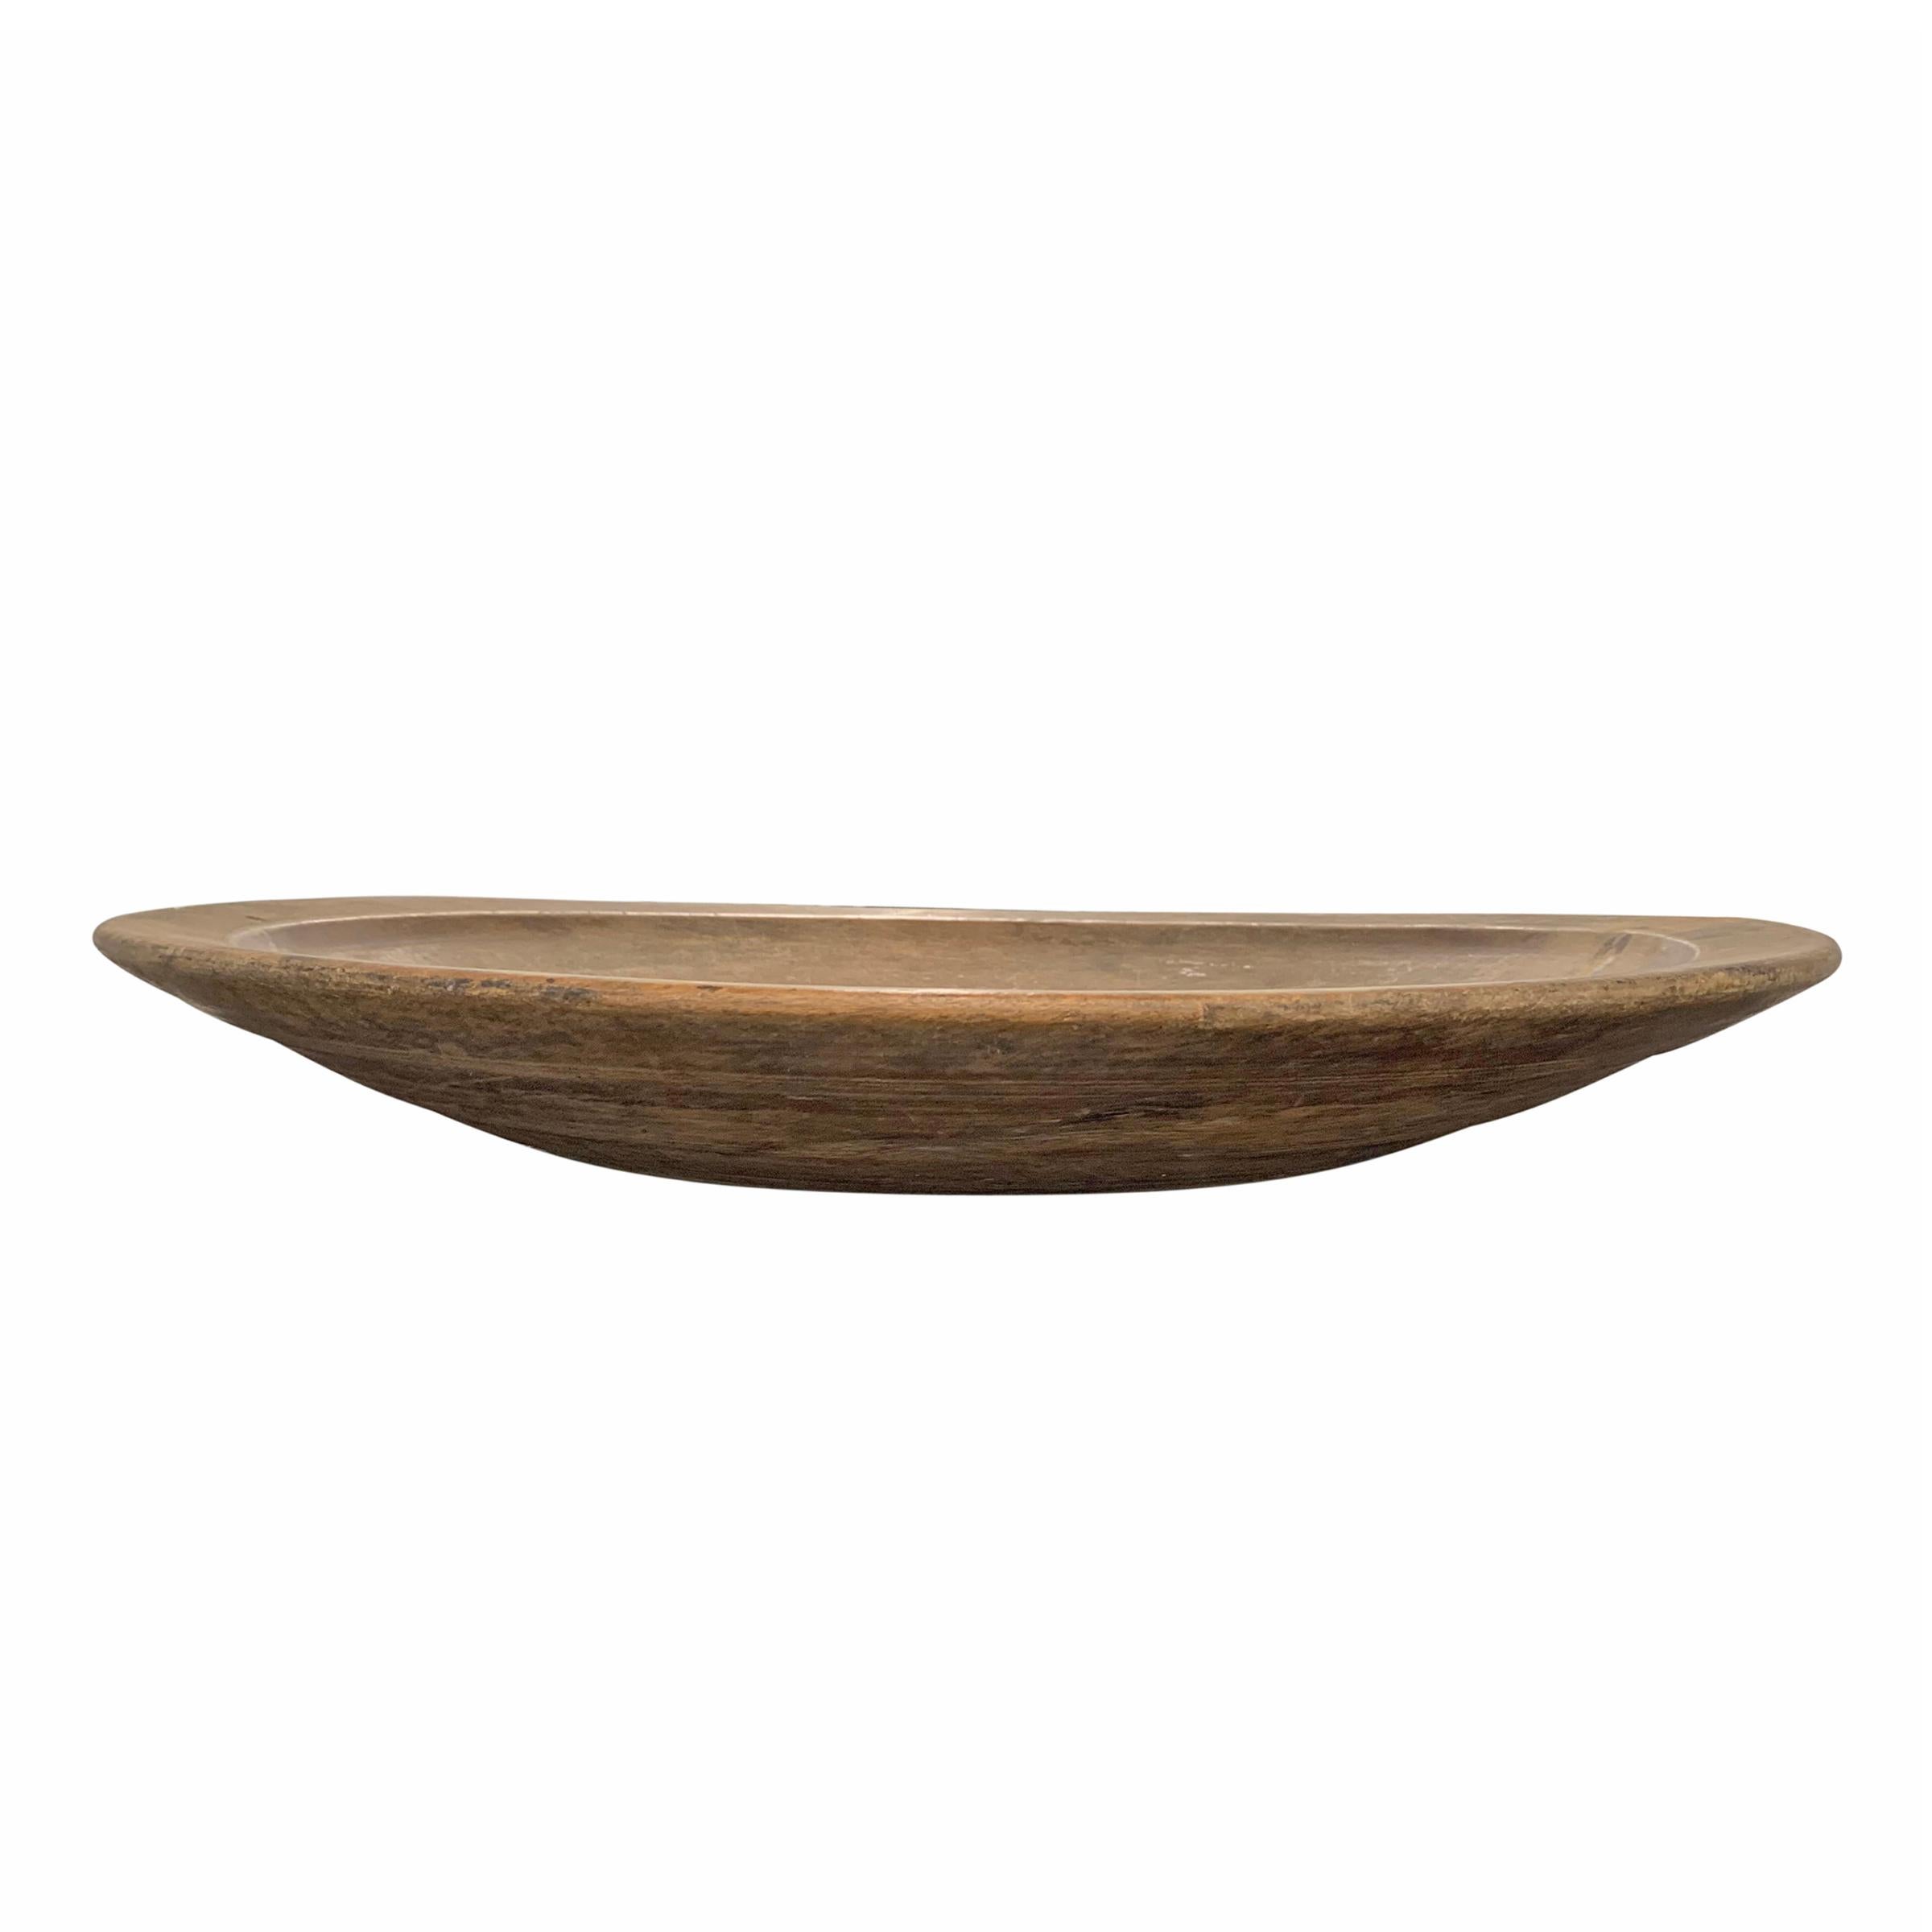 Rustic 18th Century American Turned Wood Bowl For Sale